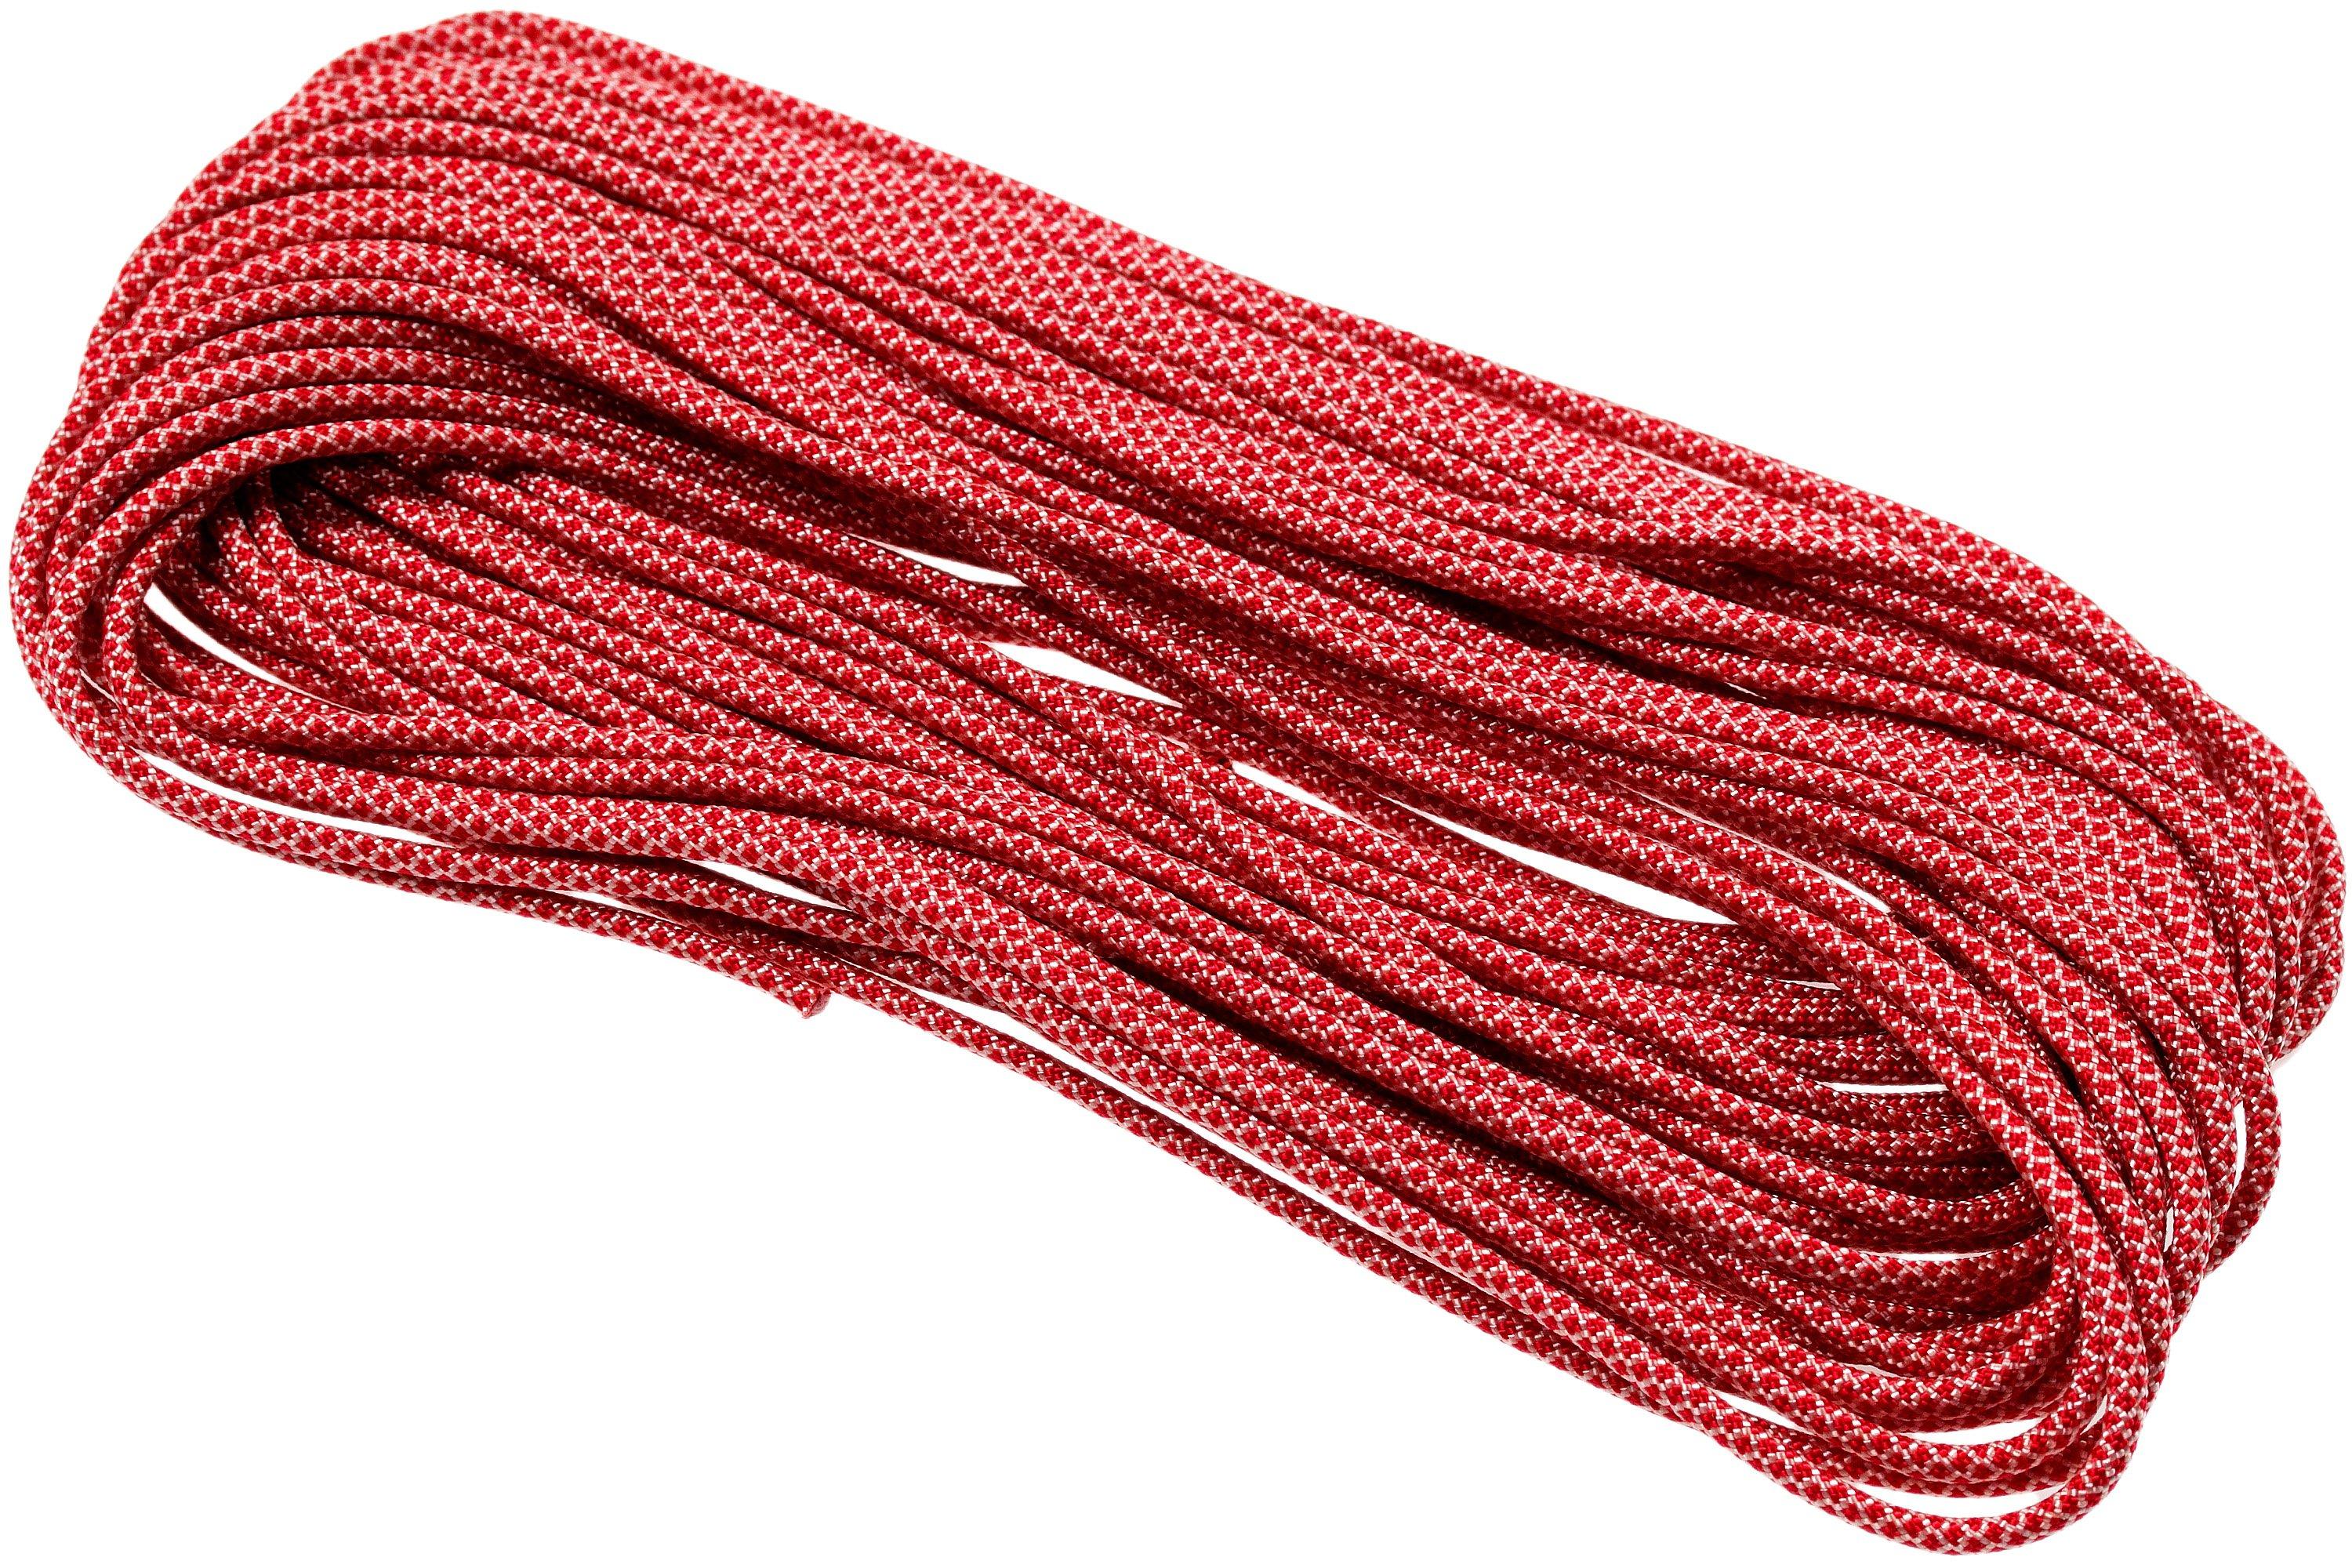 Atwood Rope MFG - 550 Paracord - Red - 300ft 